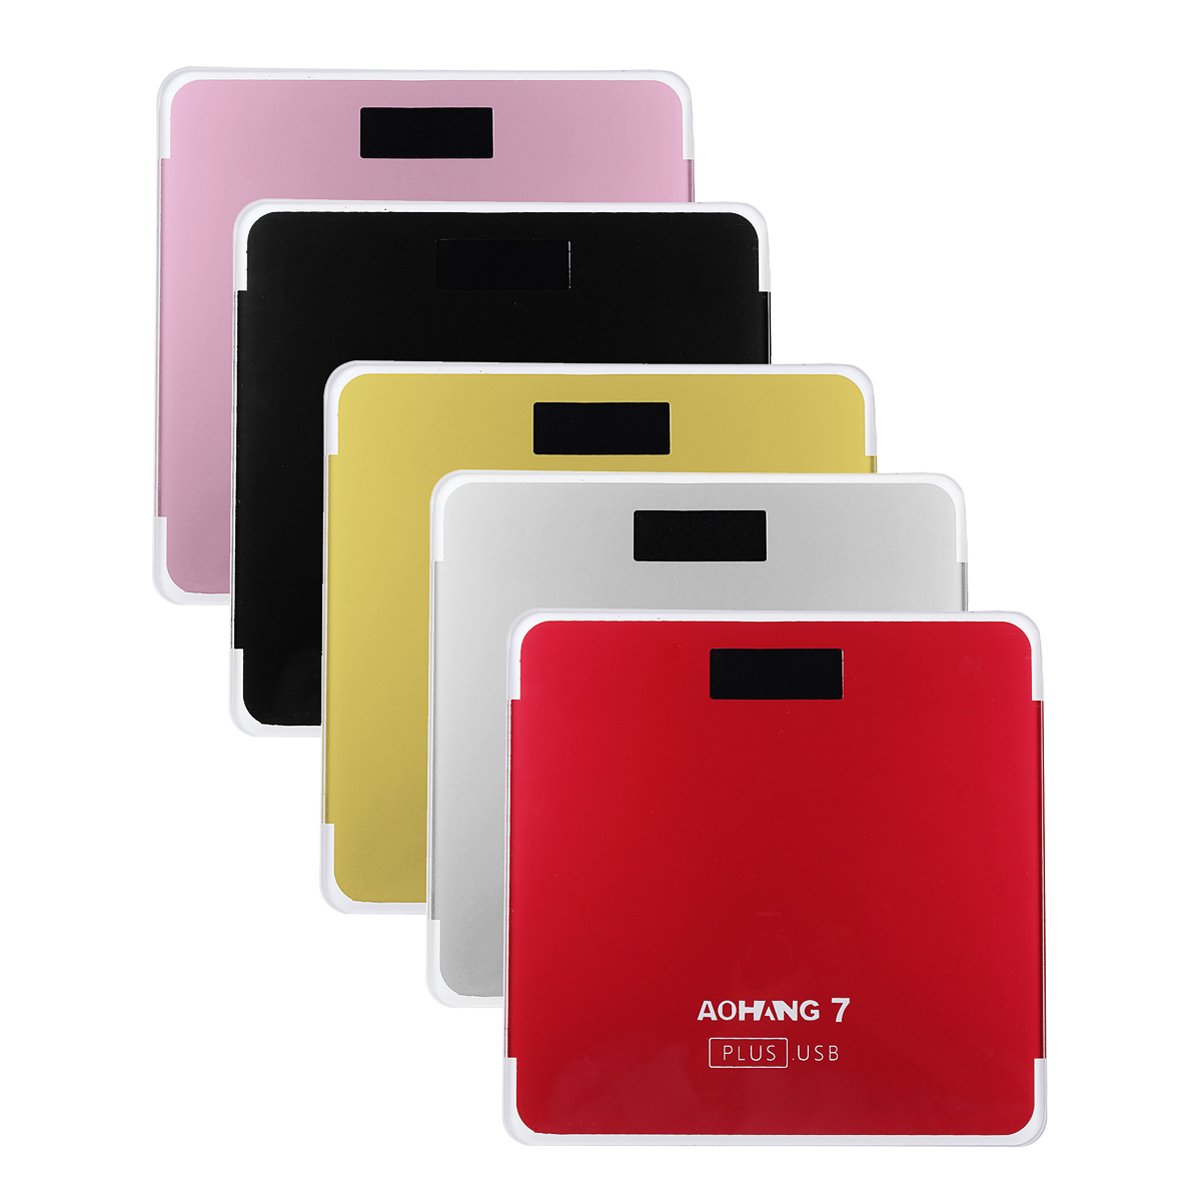 AOHANG-7-Plus-USB-Version-180kg-LCD-Electronic-Digital-Tempered-Glass-Body-Weight-Scale-1238740